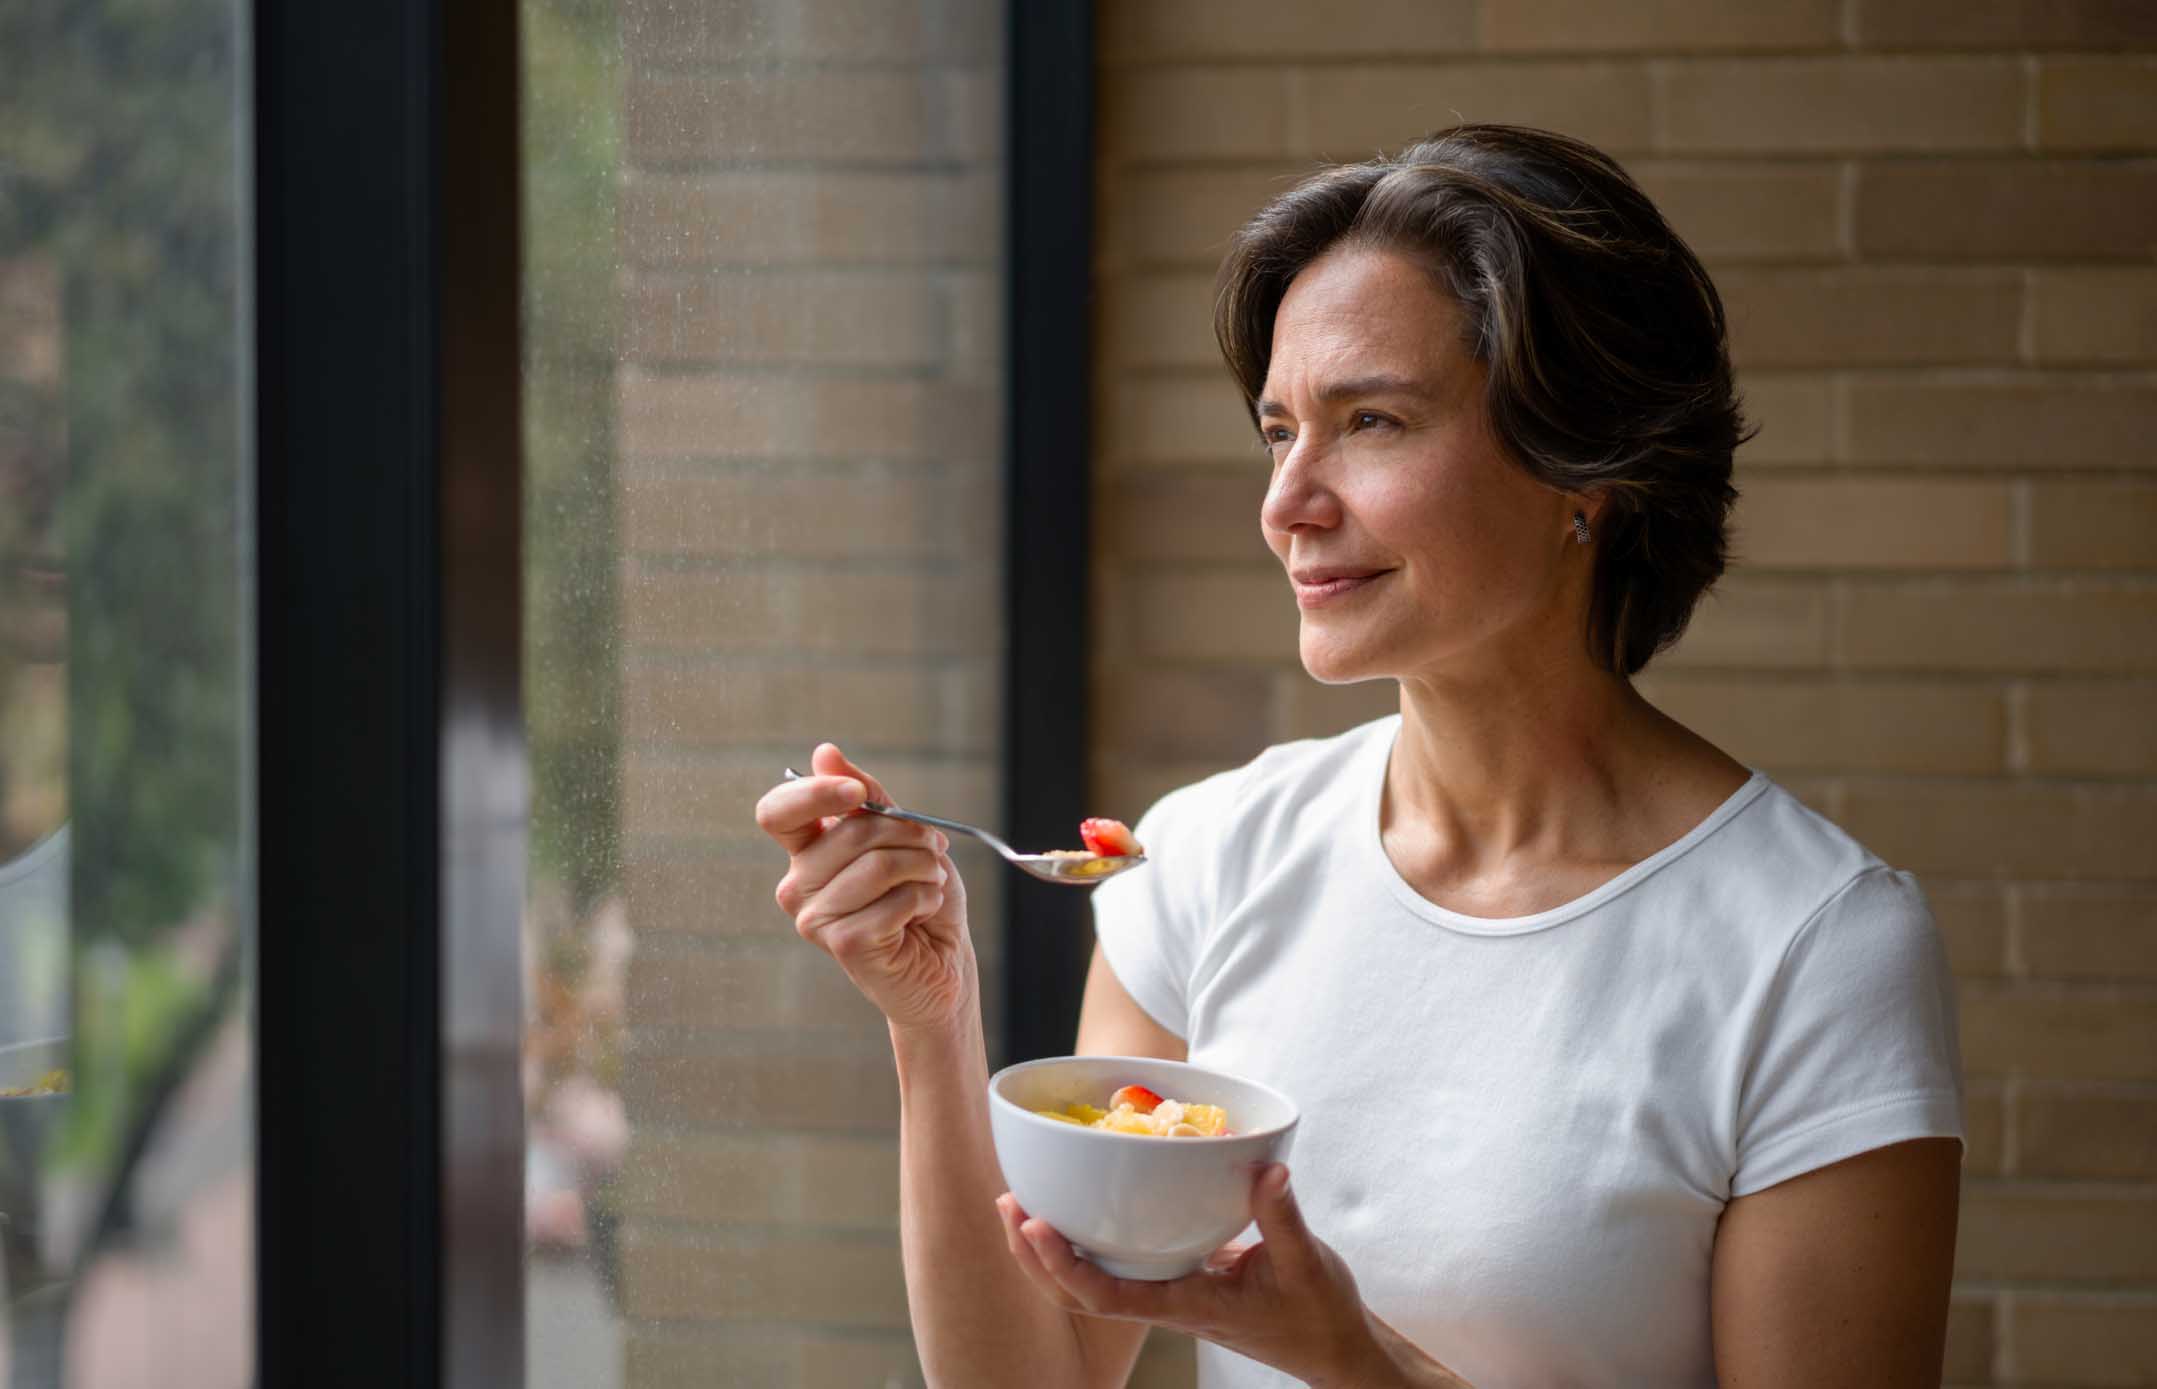 Foods to Avoid to Prevent Menopausal Bloating